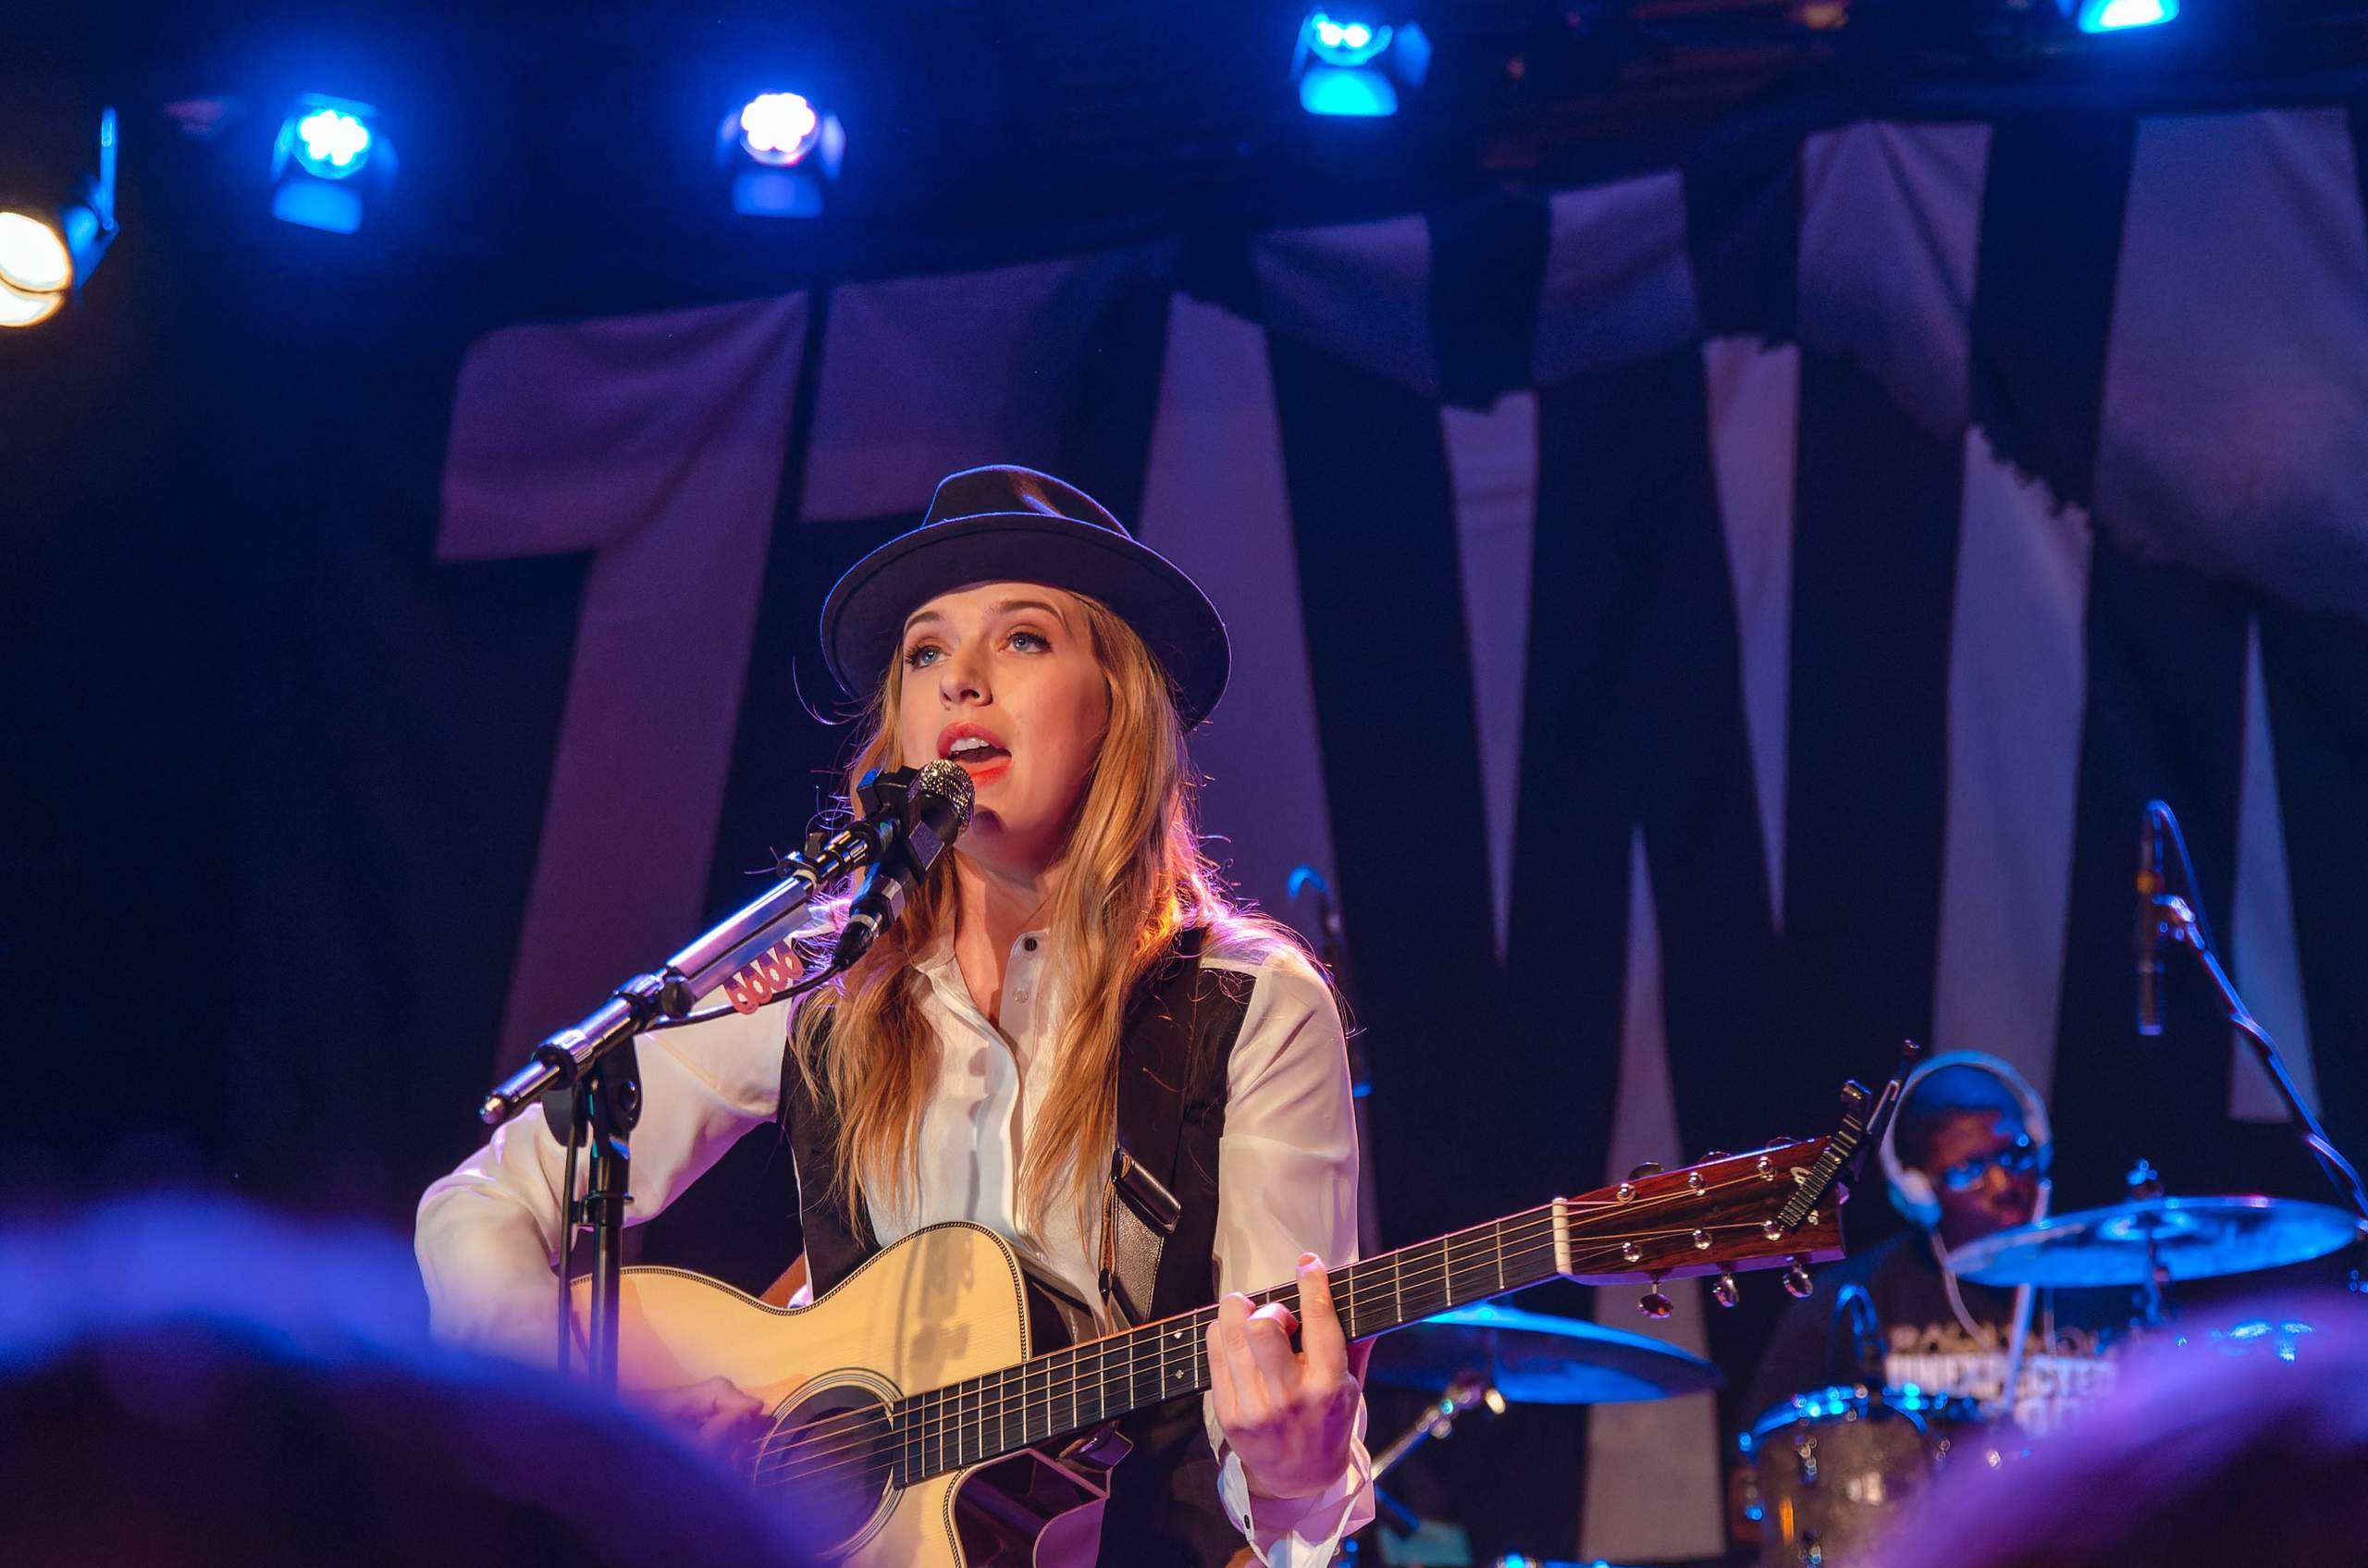 ZZ Ward performing at The Majestic in Madison, WI June 26, 2013, photography by Ross Harried for Second Crop Music